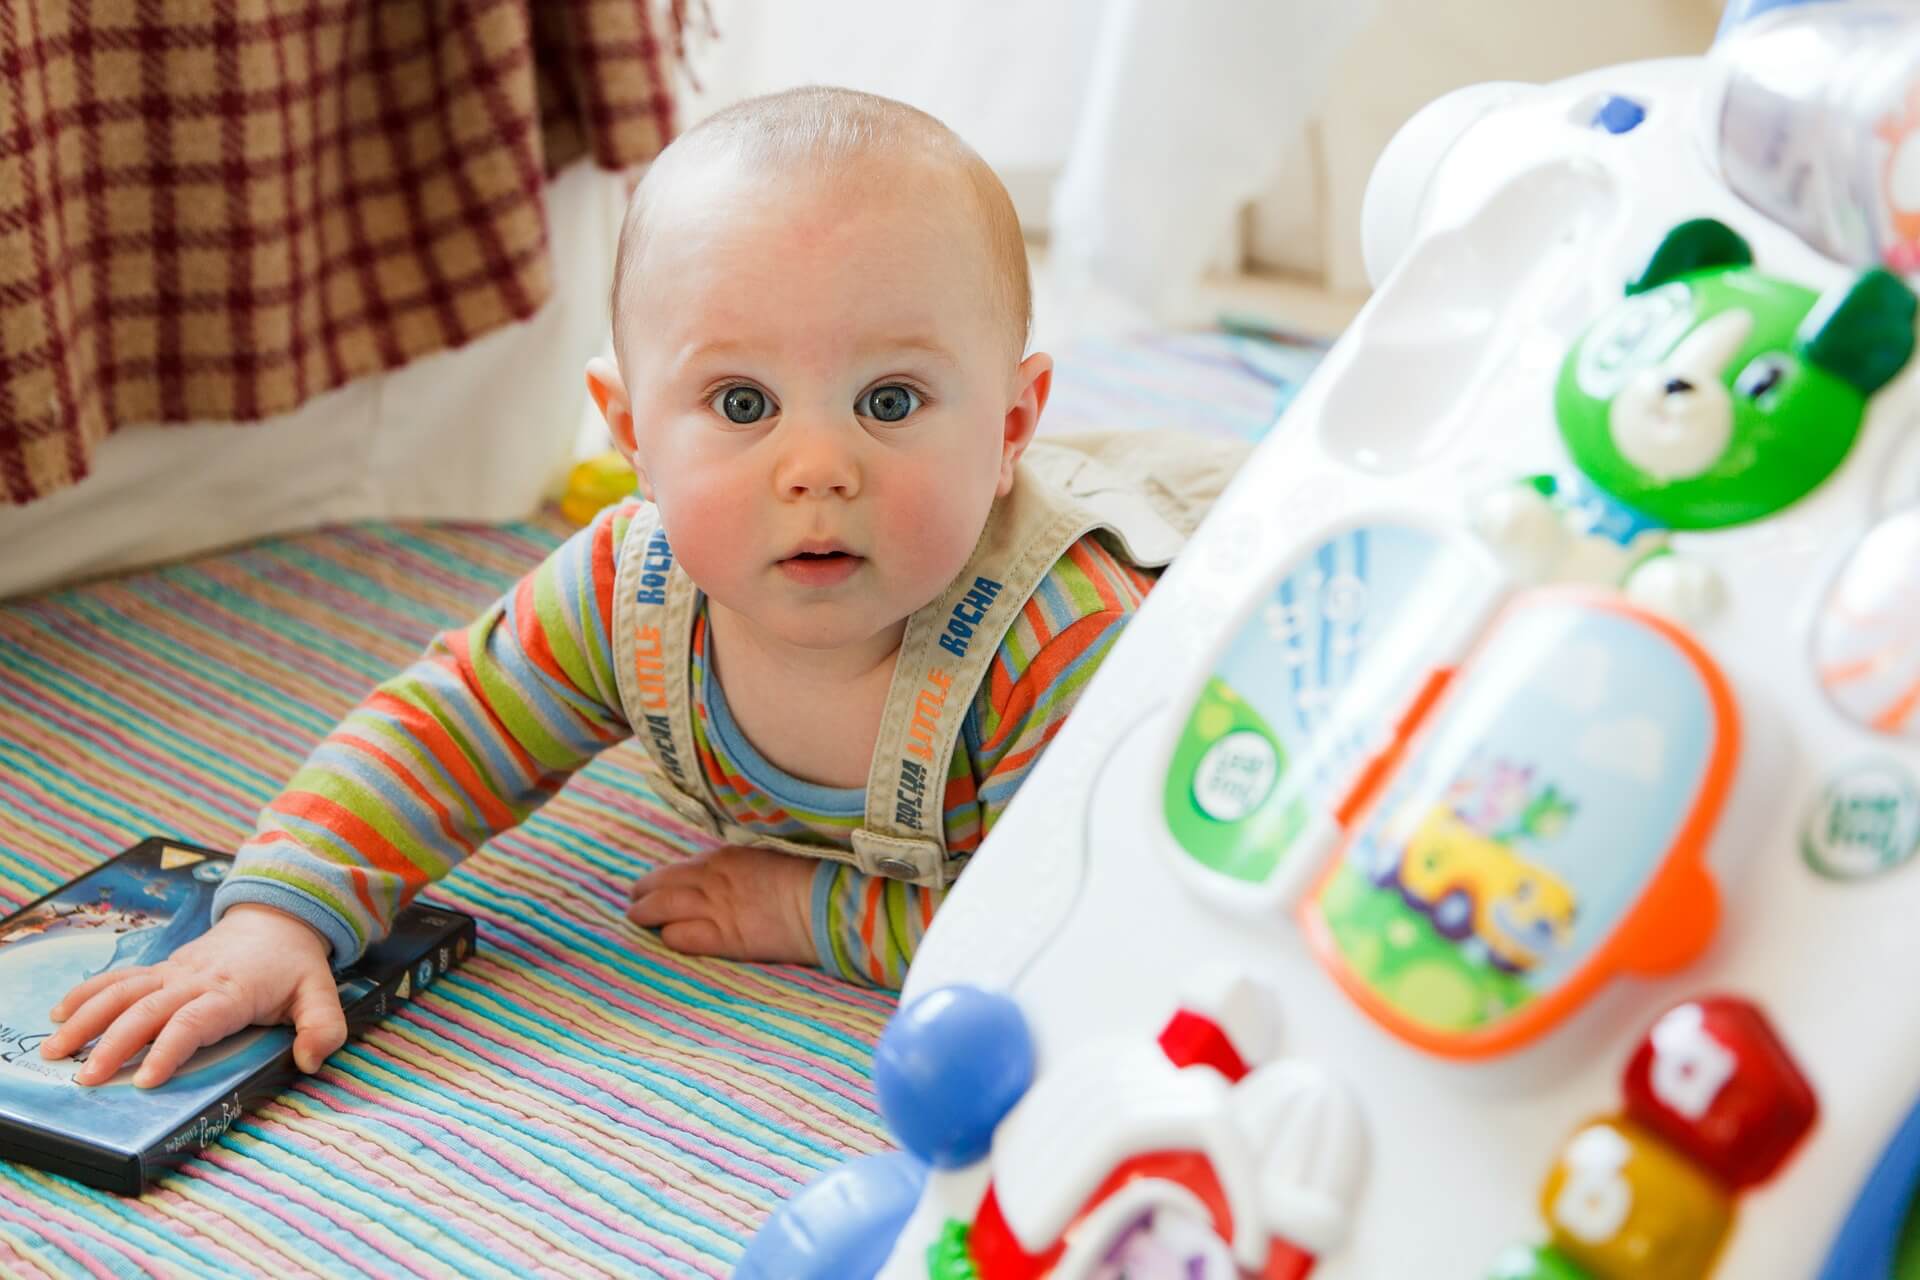 10 Early Stimulation Exercises For Your Baby